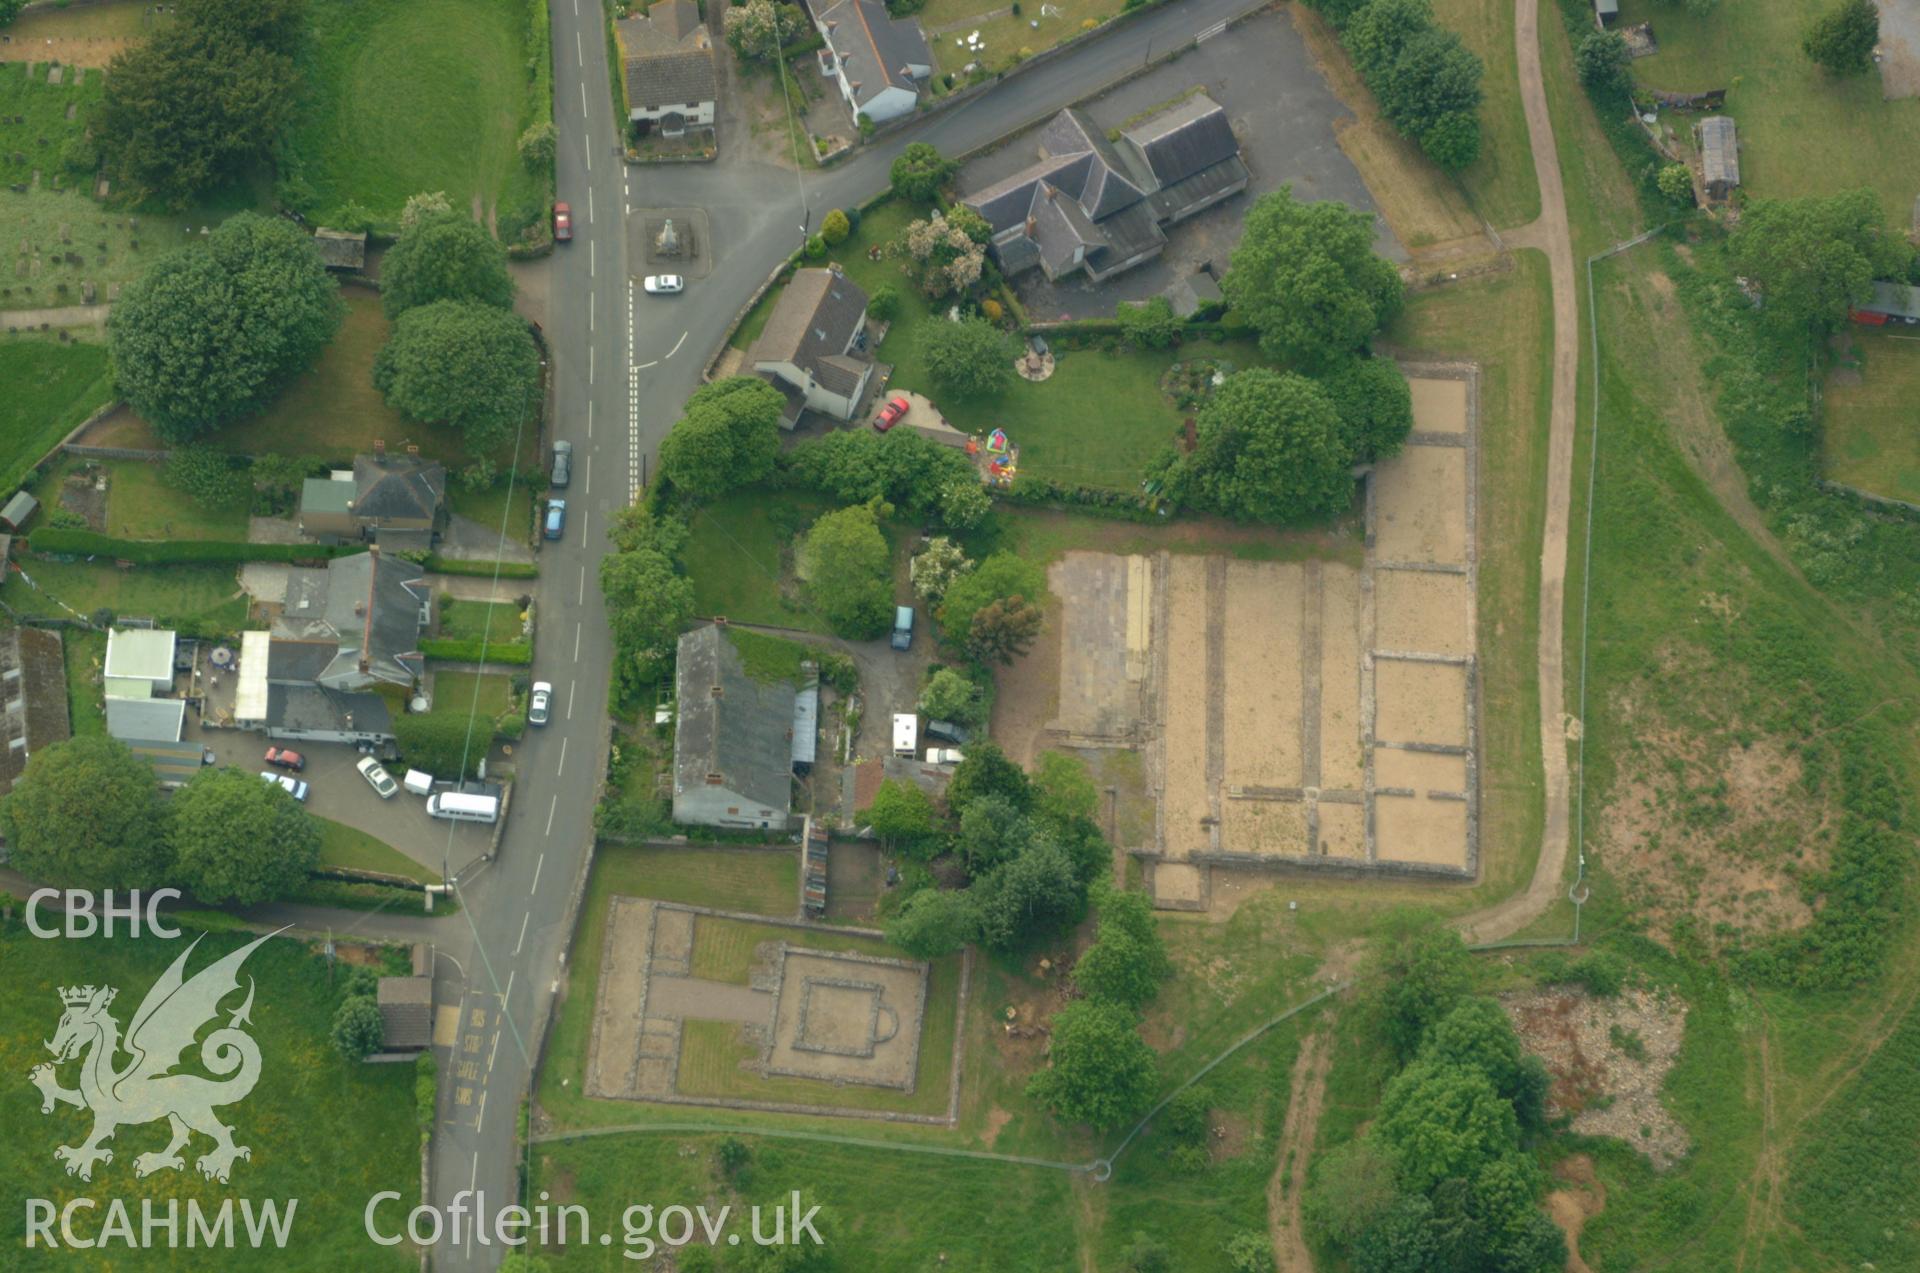 RCAHMW colour oblique aerial photograph of the Roman Temple at Caerwent taken on 26/05/2004 by Toby Driver